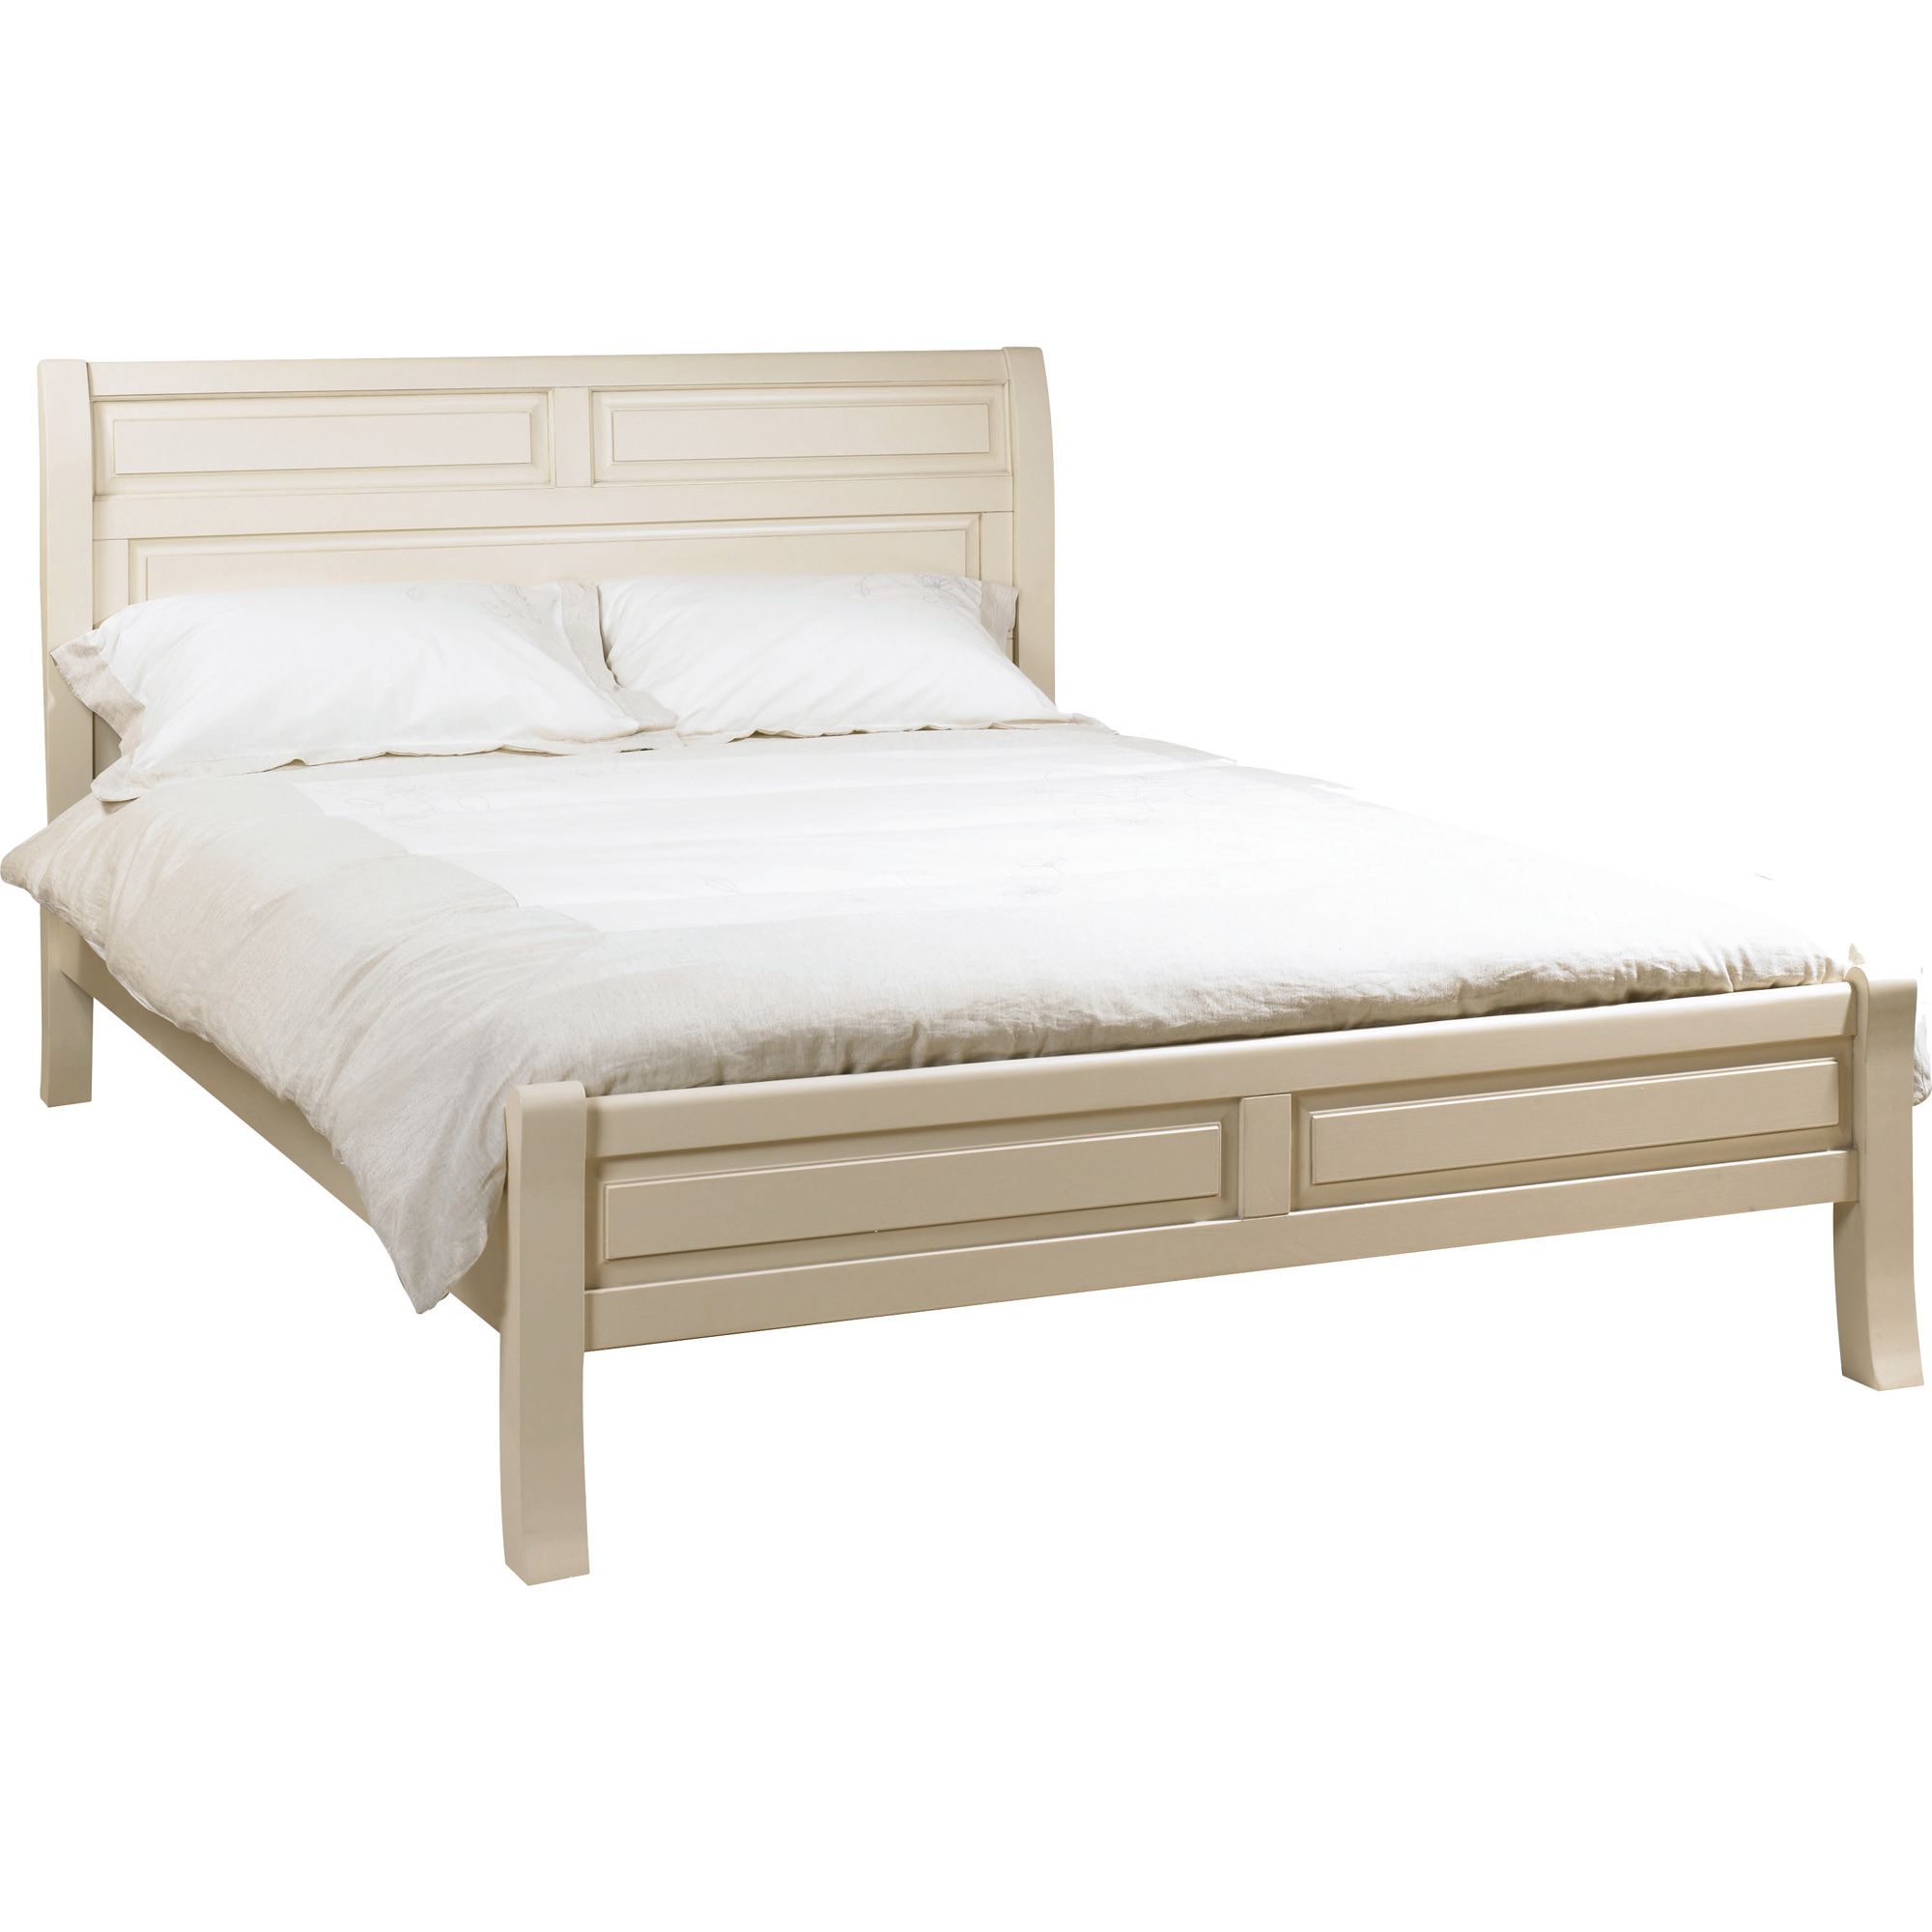 YP Furniture Country House Bedstead including Headboard and Footboard - Single at Tescos Direct